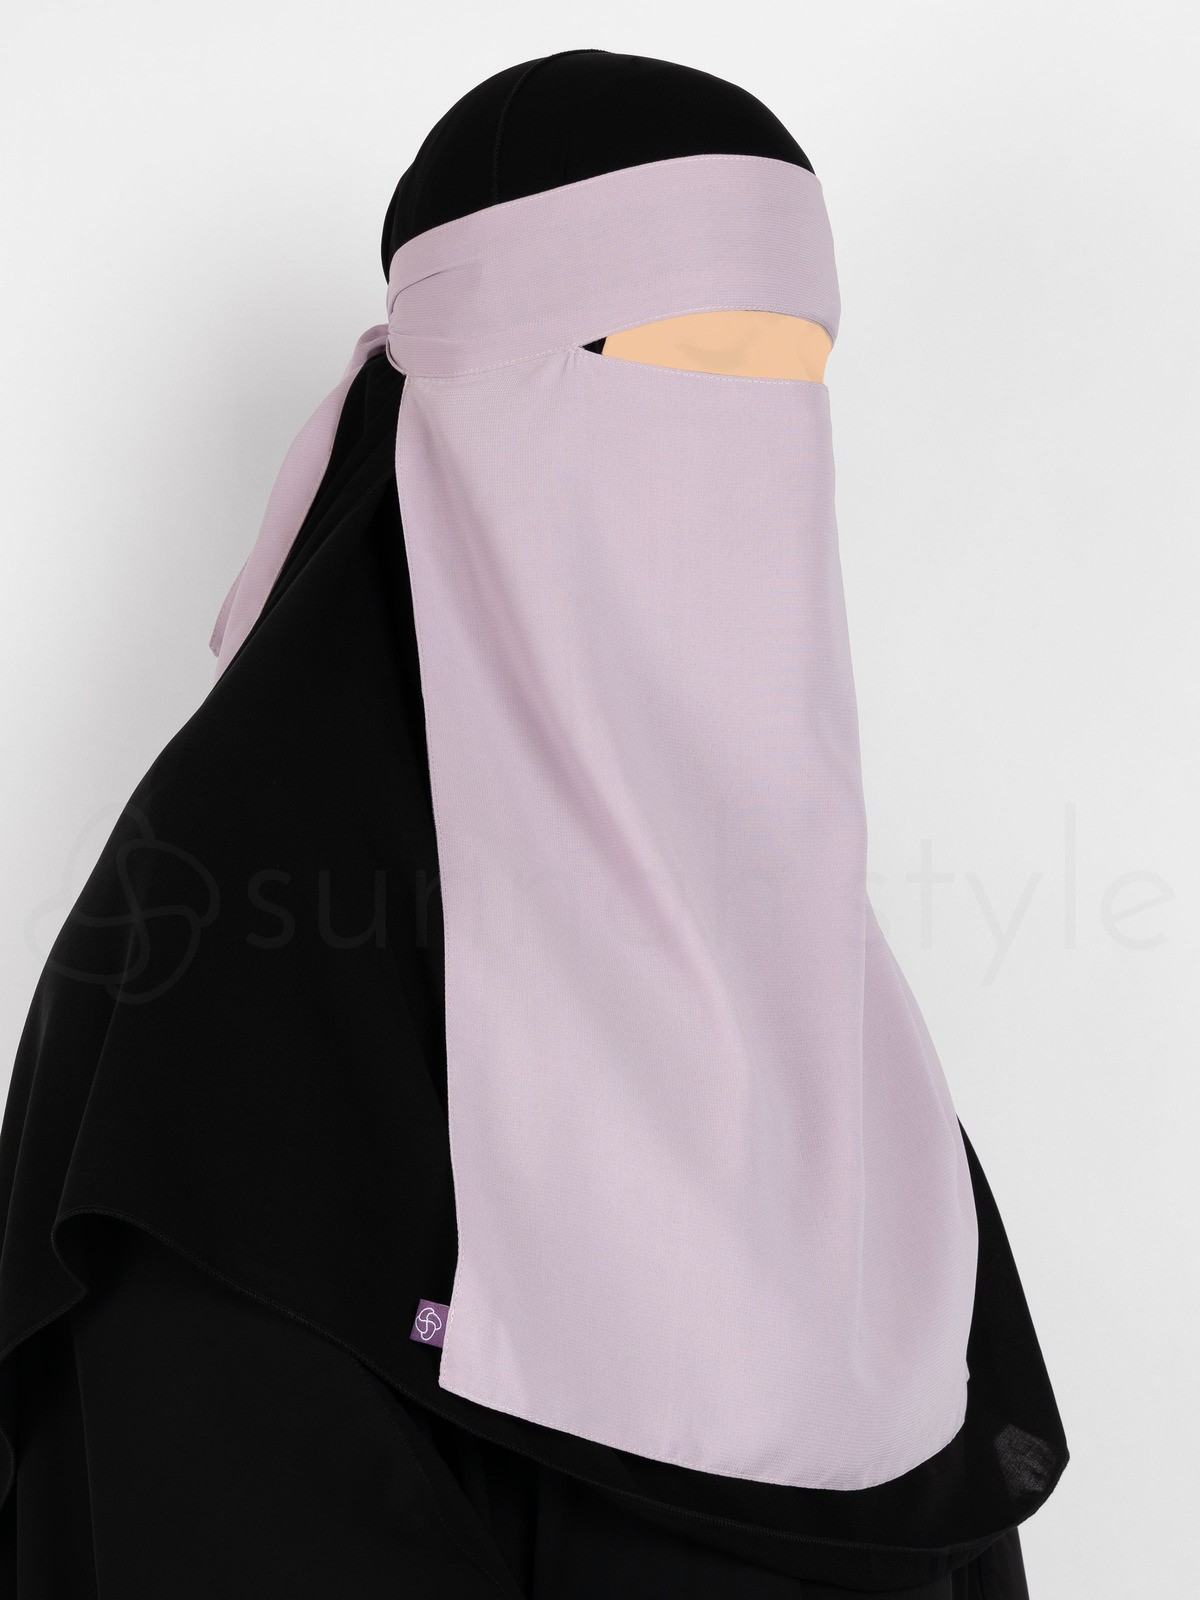 Sunnah Style - One Layer Niqab (Sterling)